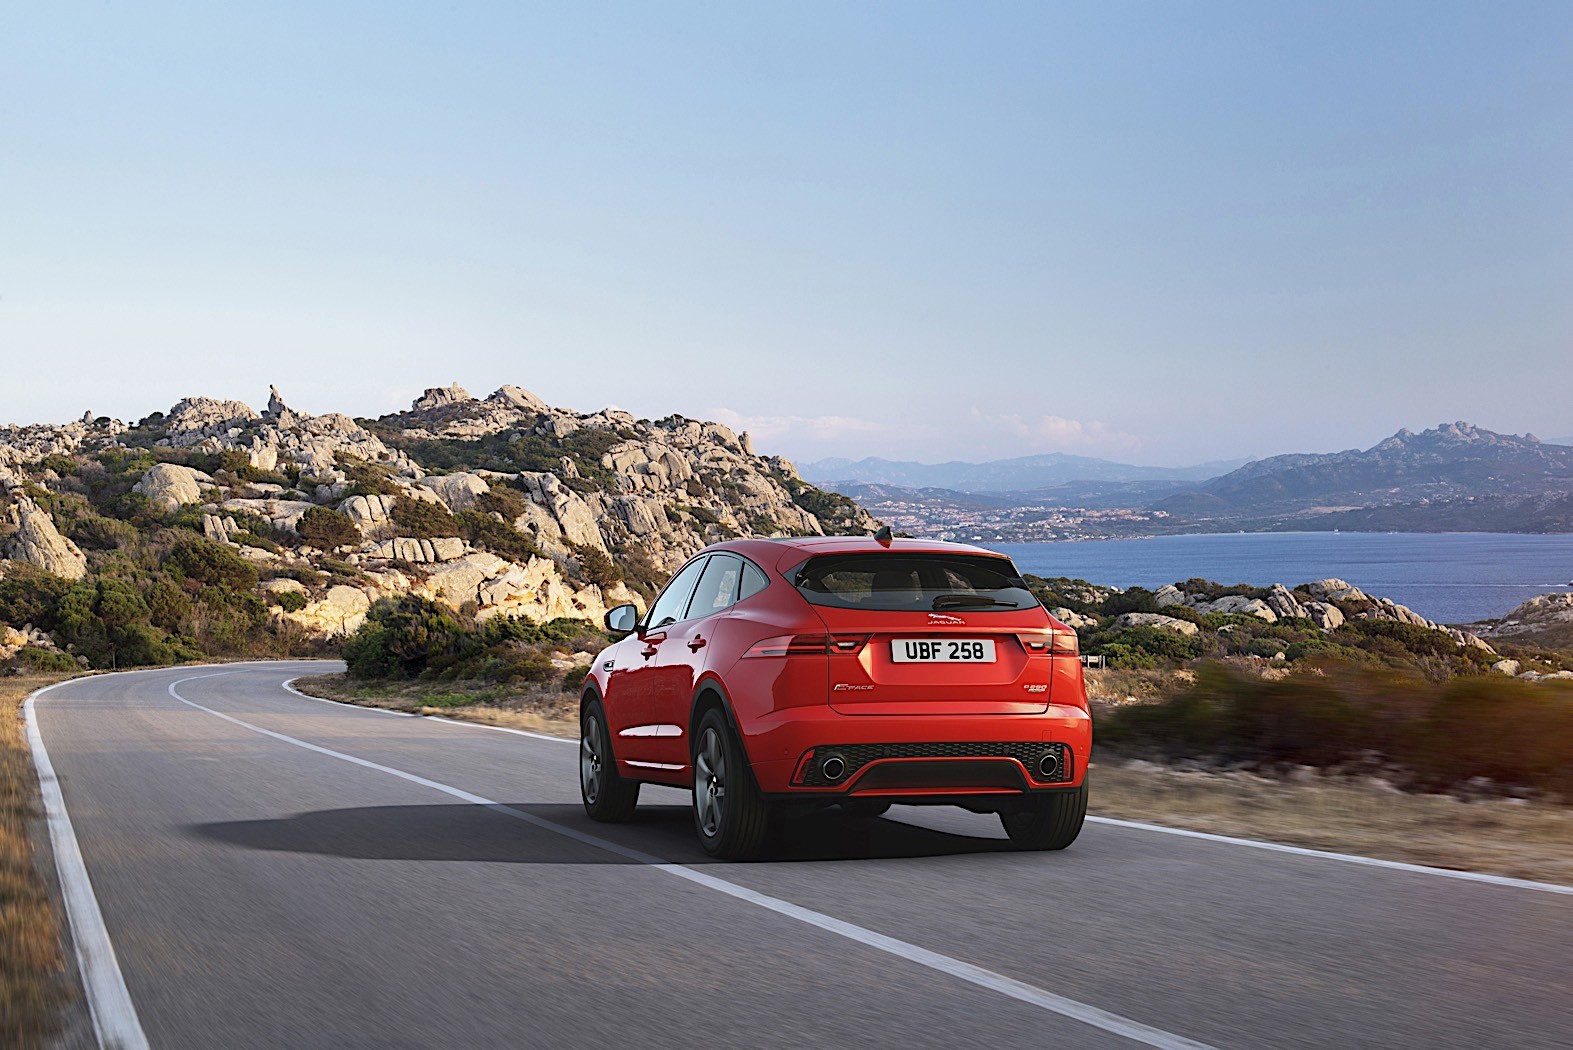 2020 Jaguar E-Pace Checkered Flag Limited Edition Coming to America for $46,400 - autoevolution